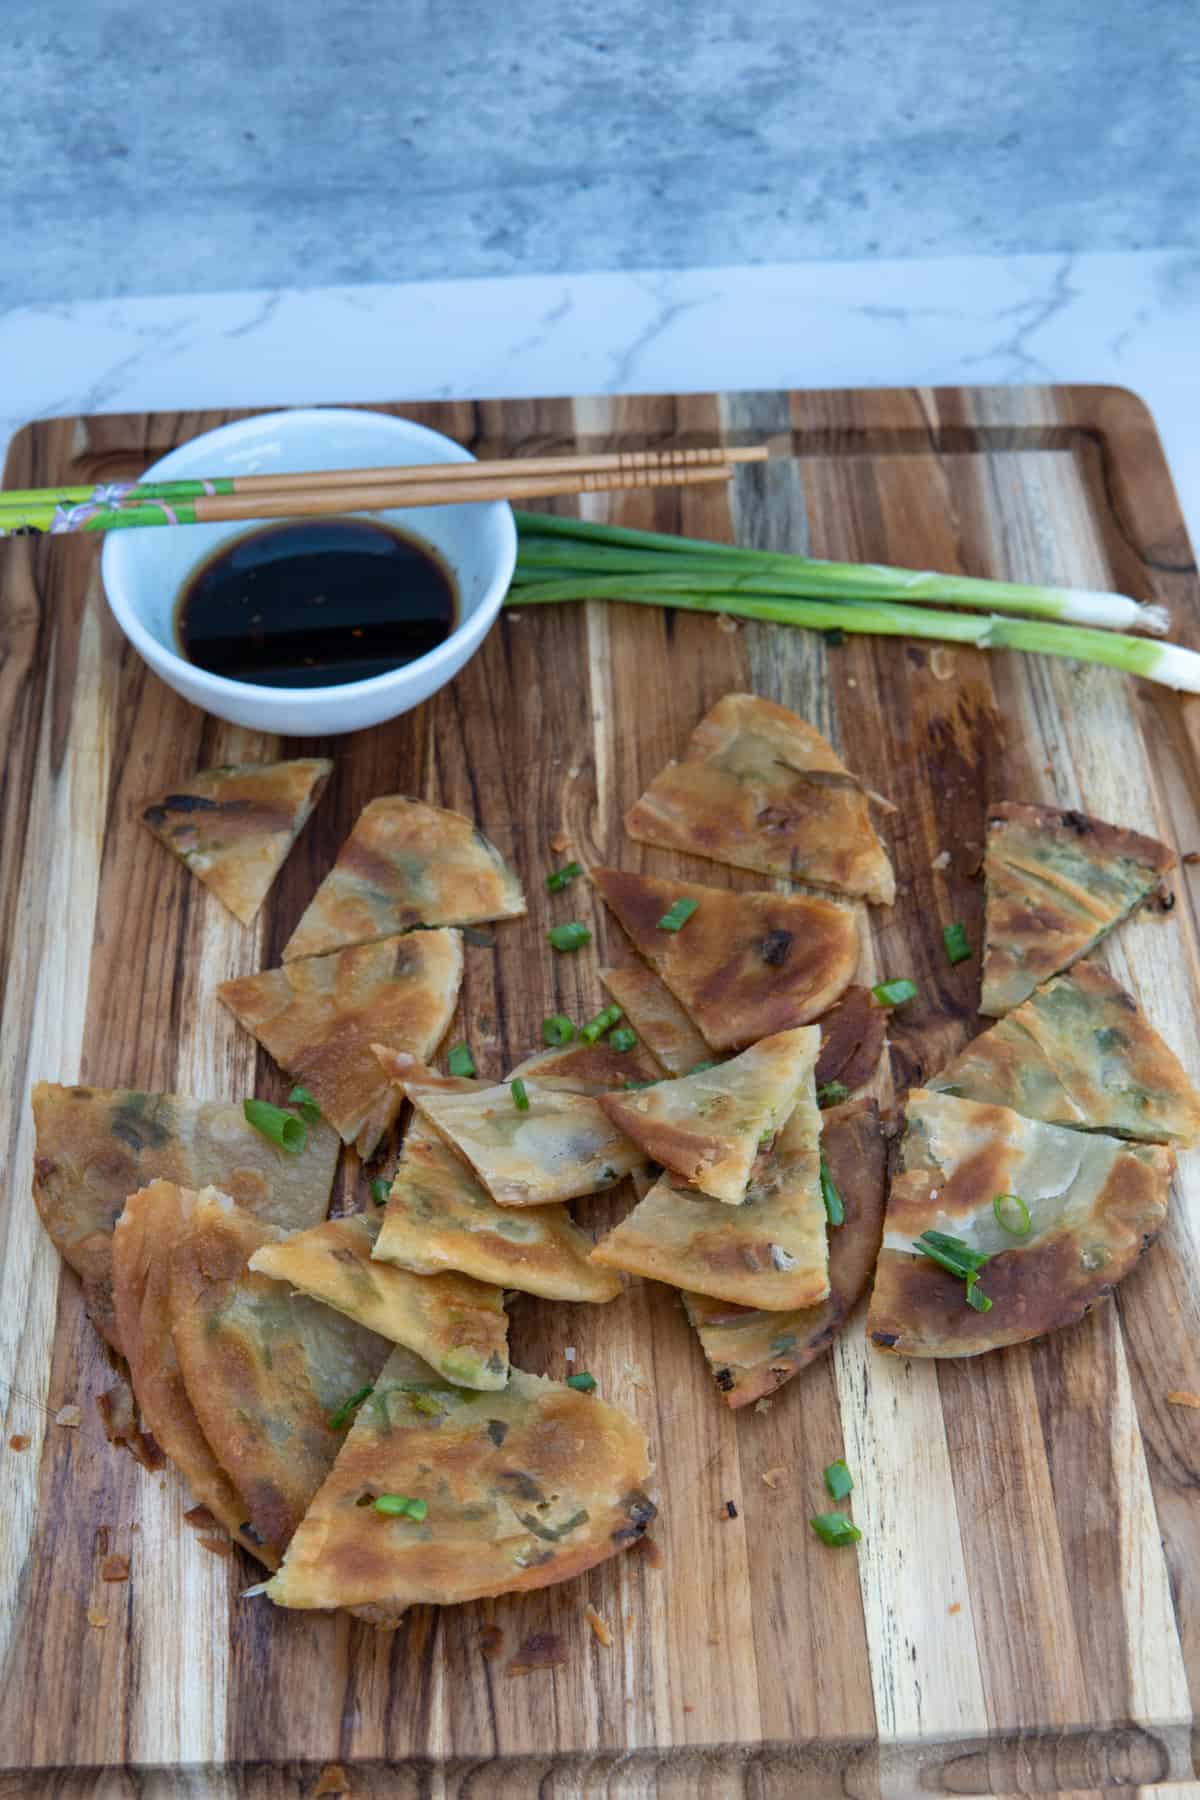 These Scallion Pancakes Recipe are made with flour, salt, scallions, vegetable oil, and dipped in a soy sauce, vinegar, and maple syrup.